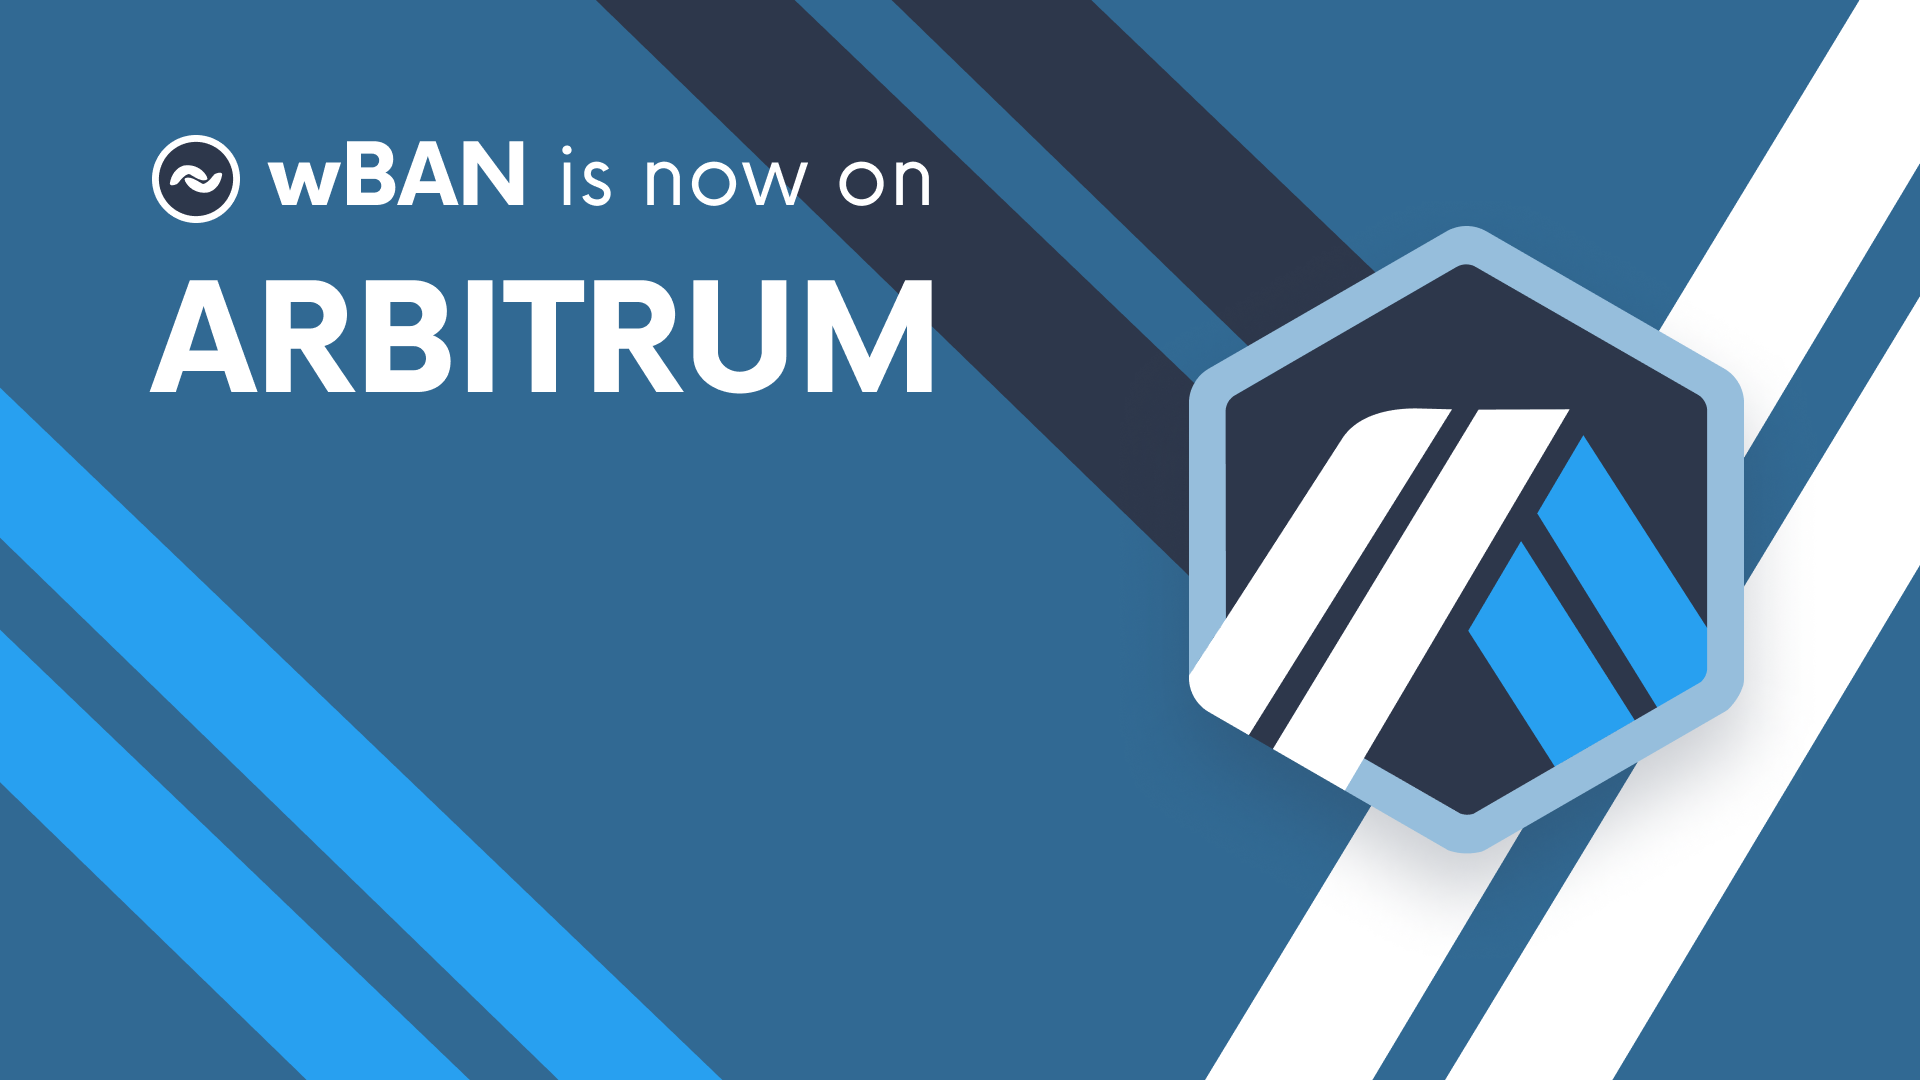 Wrapped Banano (wBAN) is now Live on Arbitrum and SushiSwap!